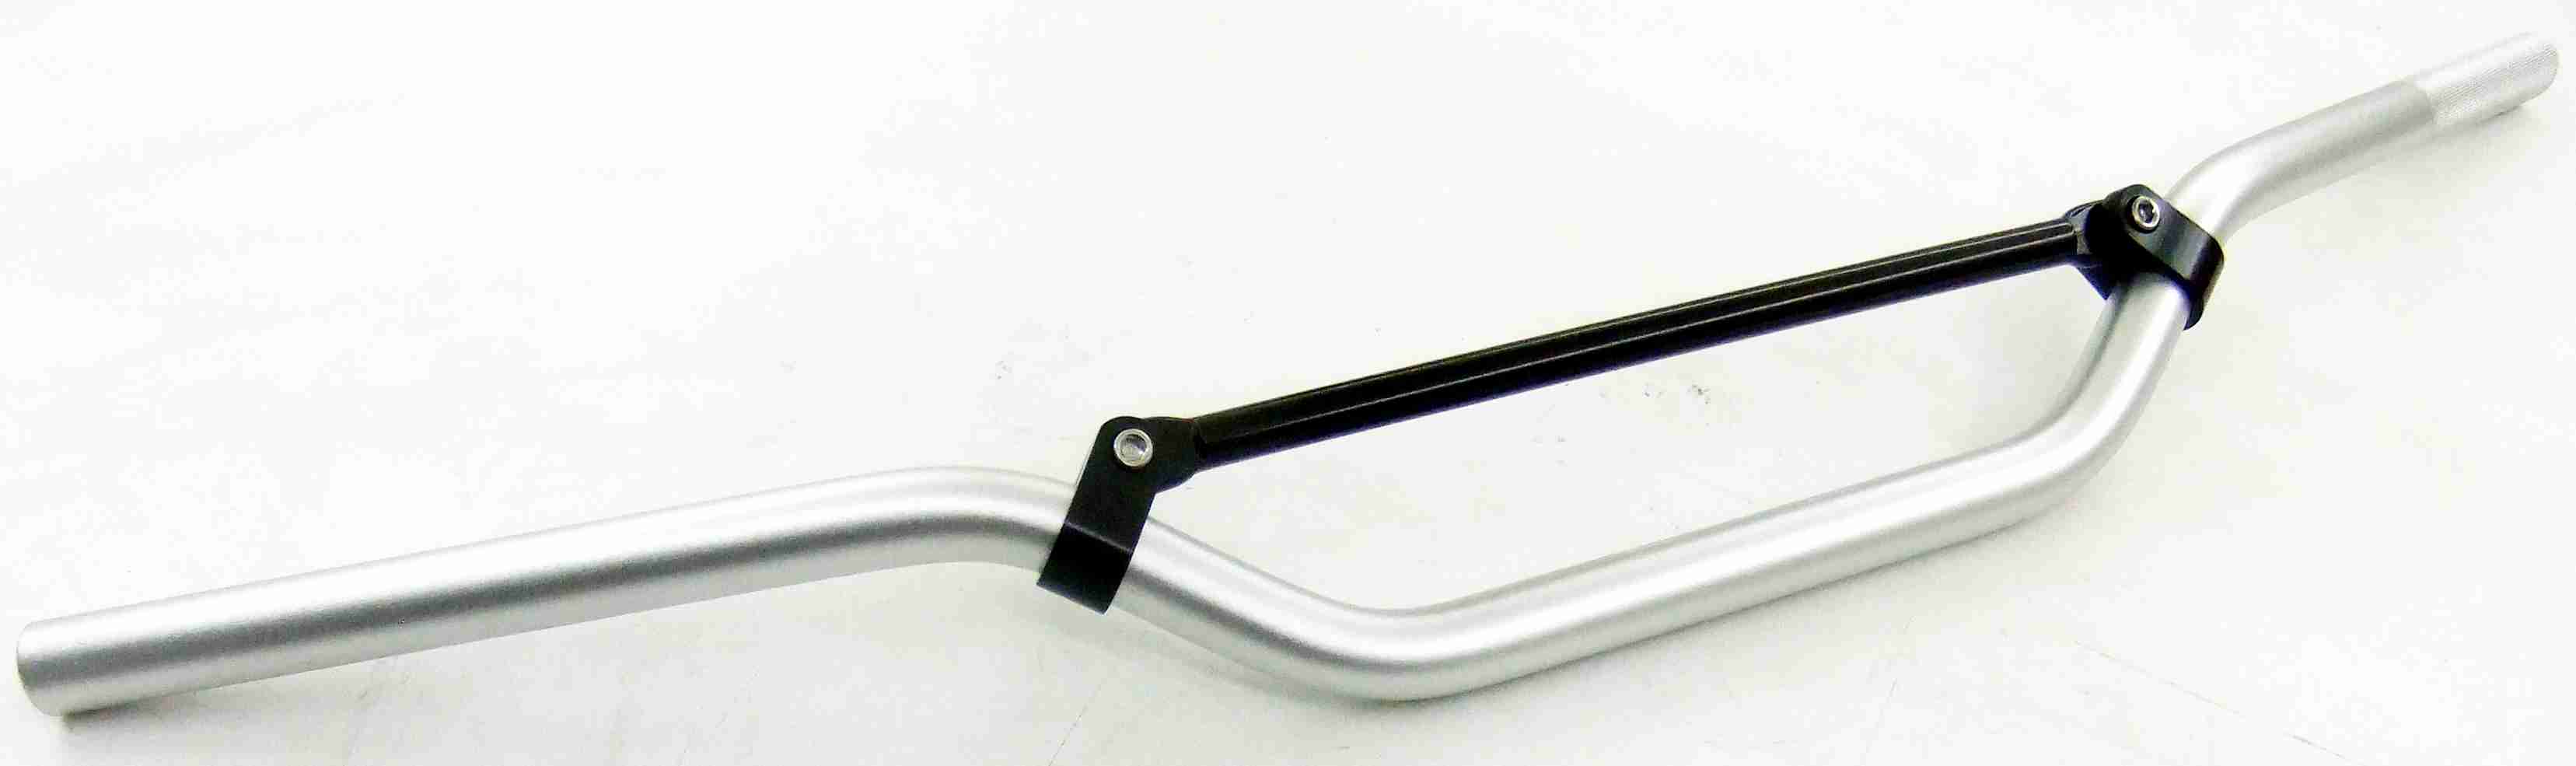 SCHREMS HANDLEBAR OFF ROAD MINI FOR 60-85CC BIKES 22,2 MM SILVER (DIMENSIONS SEE MORE IMAGES: A=740 / B=114 / C=80 / D=175 / E=44)